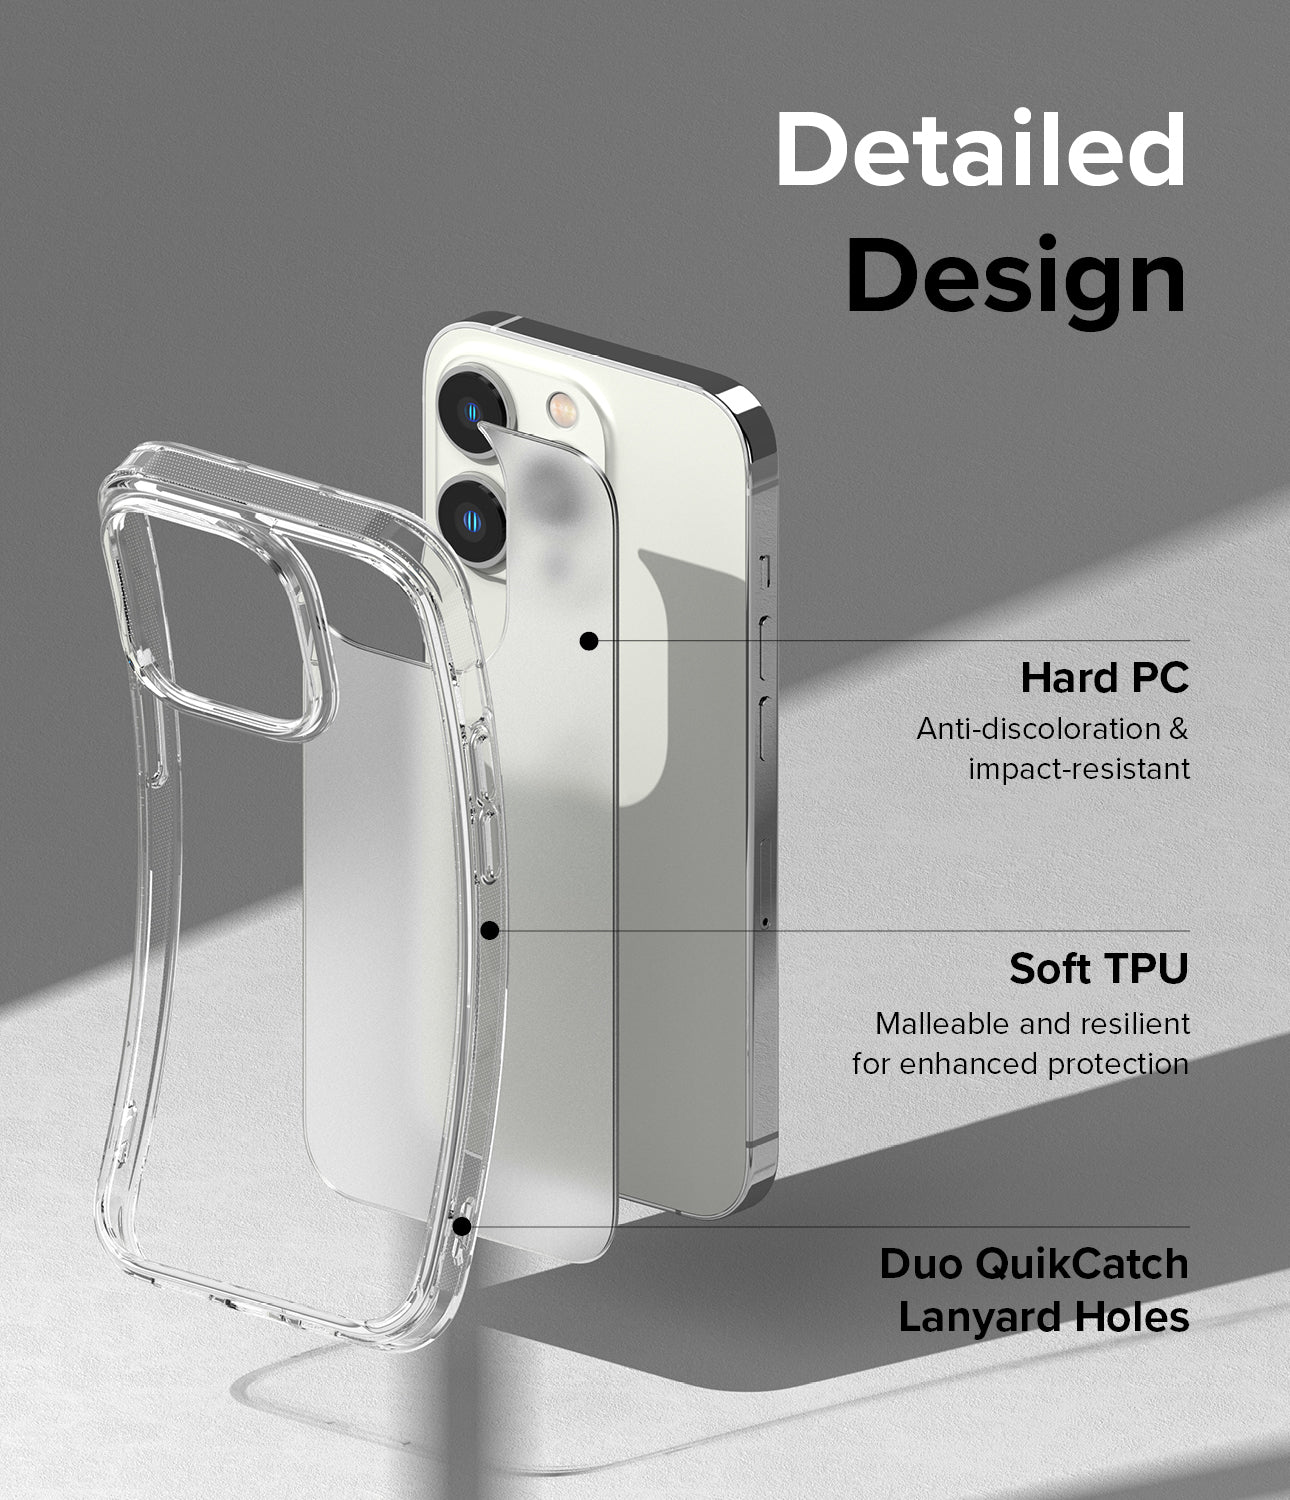 iPhone 14 Pro Max Case | Fusion Matte - Clear- Detailed Design. Anti-discoloration and impact-resistant with Hard PC. Malleable and resilient for enhanced protection with Soft TPU. Duo QuikCatch Lanyard Holes.